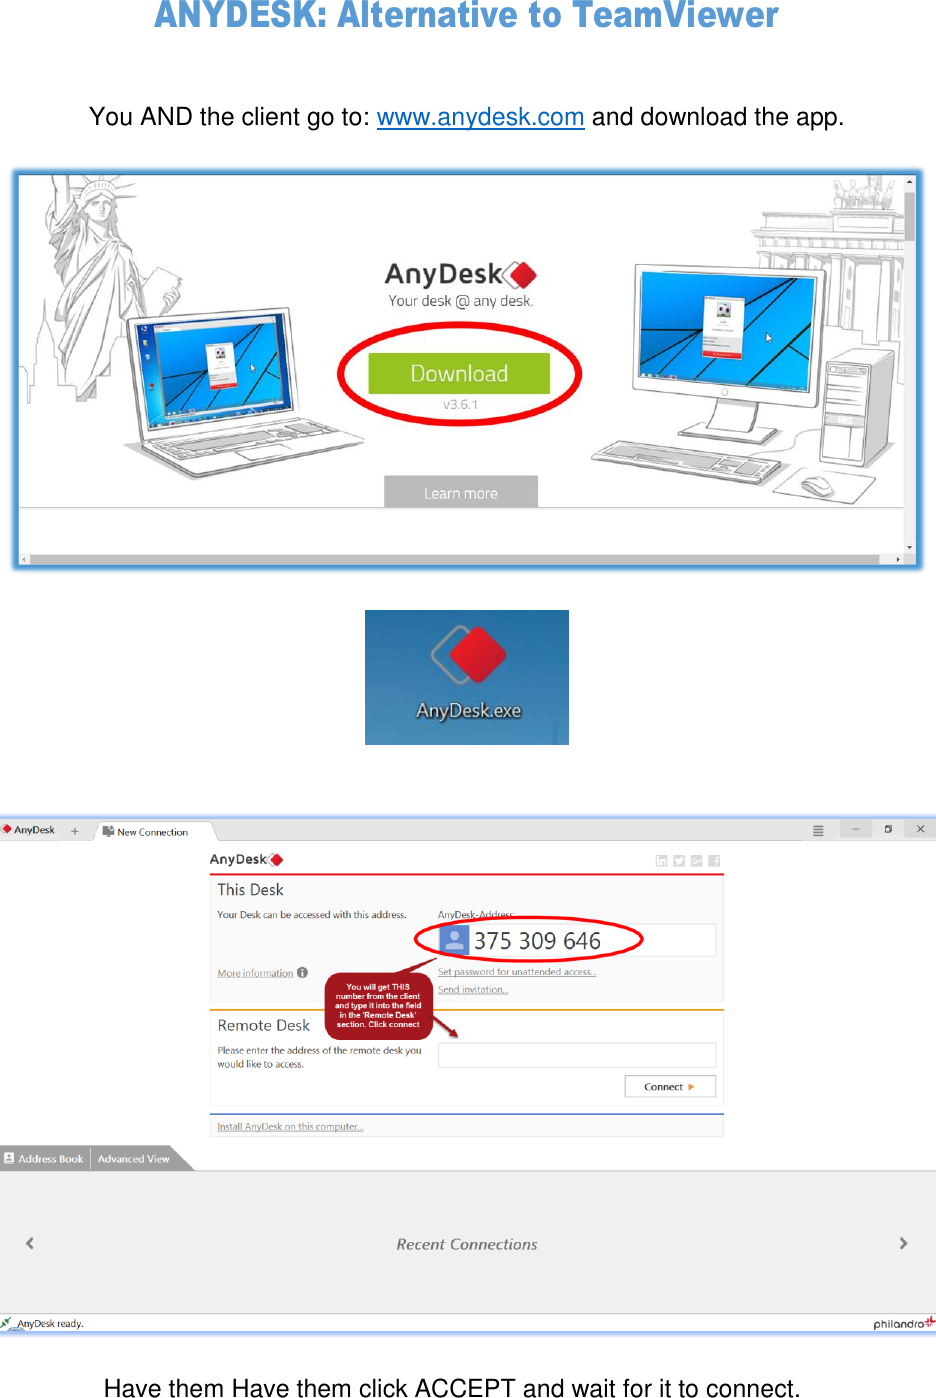 Page 1 of 3 - ANYDESK User Instructions PDF